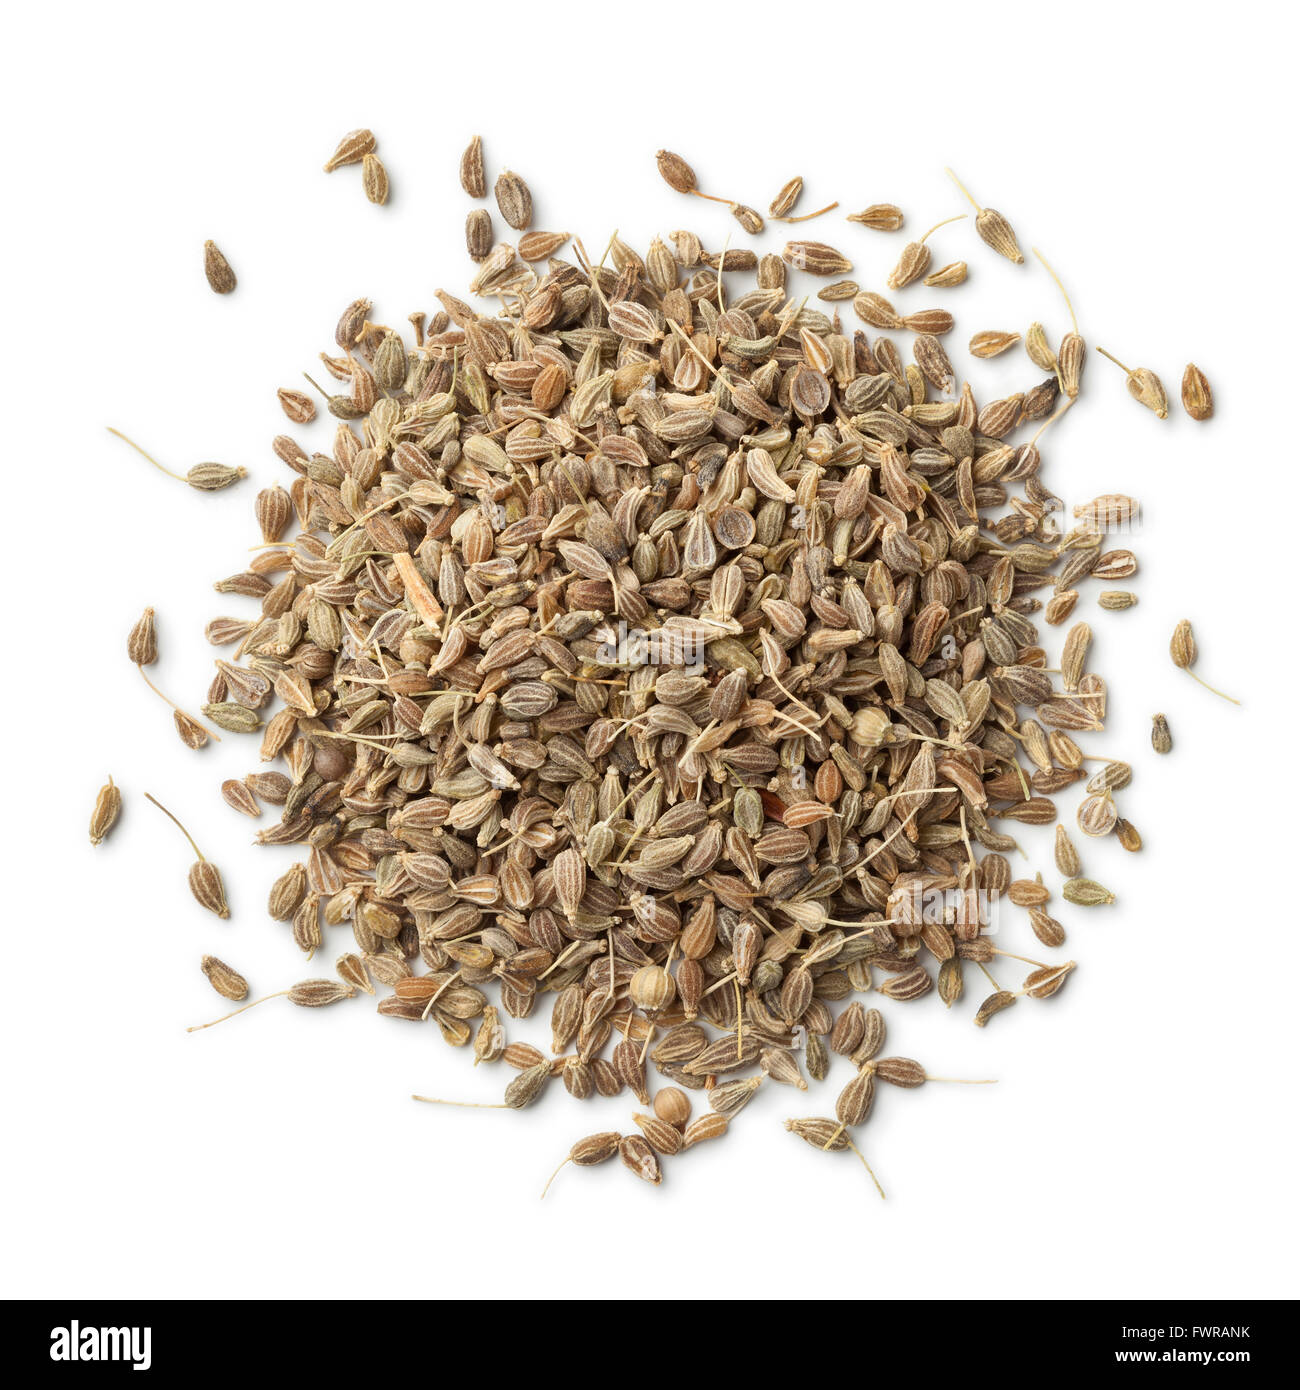 Heap of dried anise seeds on white background Stock Photo